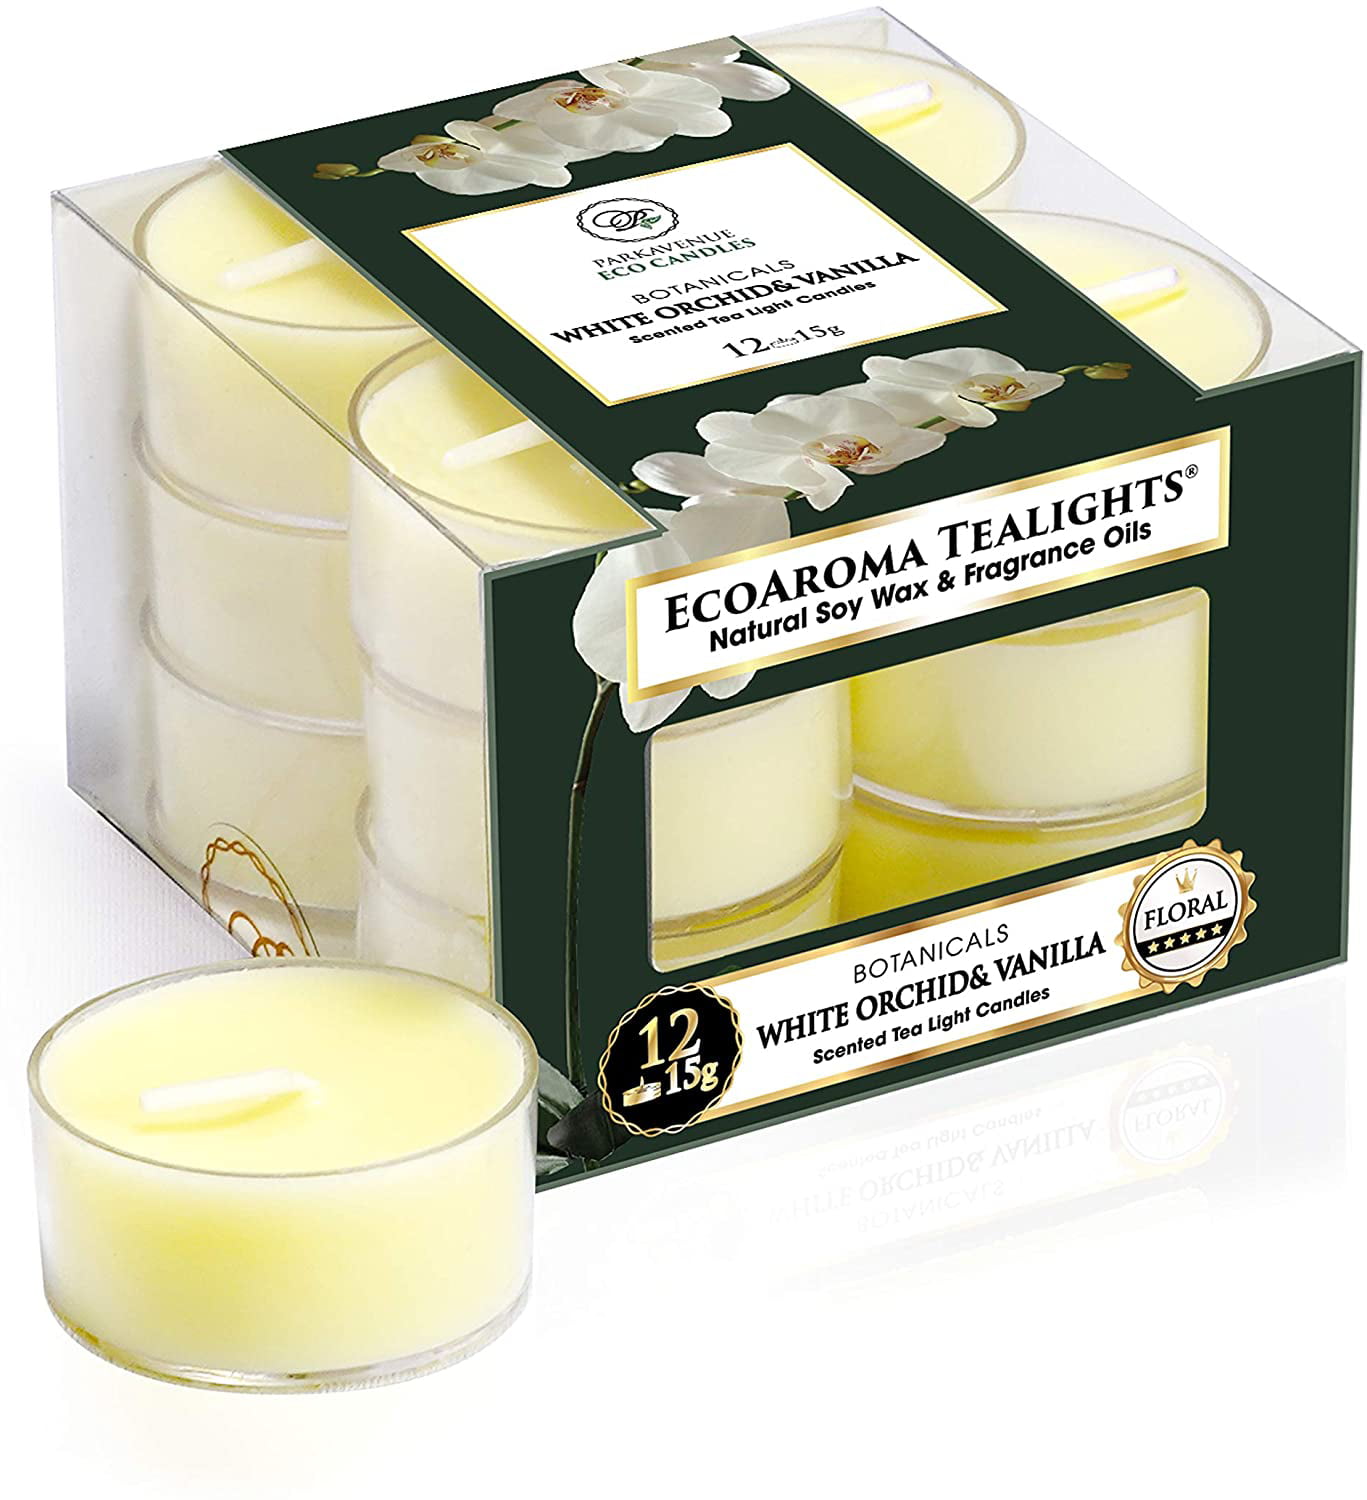 Scented Soy Candle Luxury Tealights Designer Inspired Scents Botantical Soy Wax Tealights Vegan Friendly